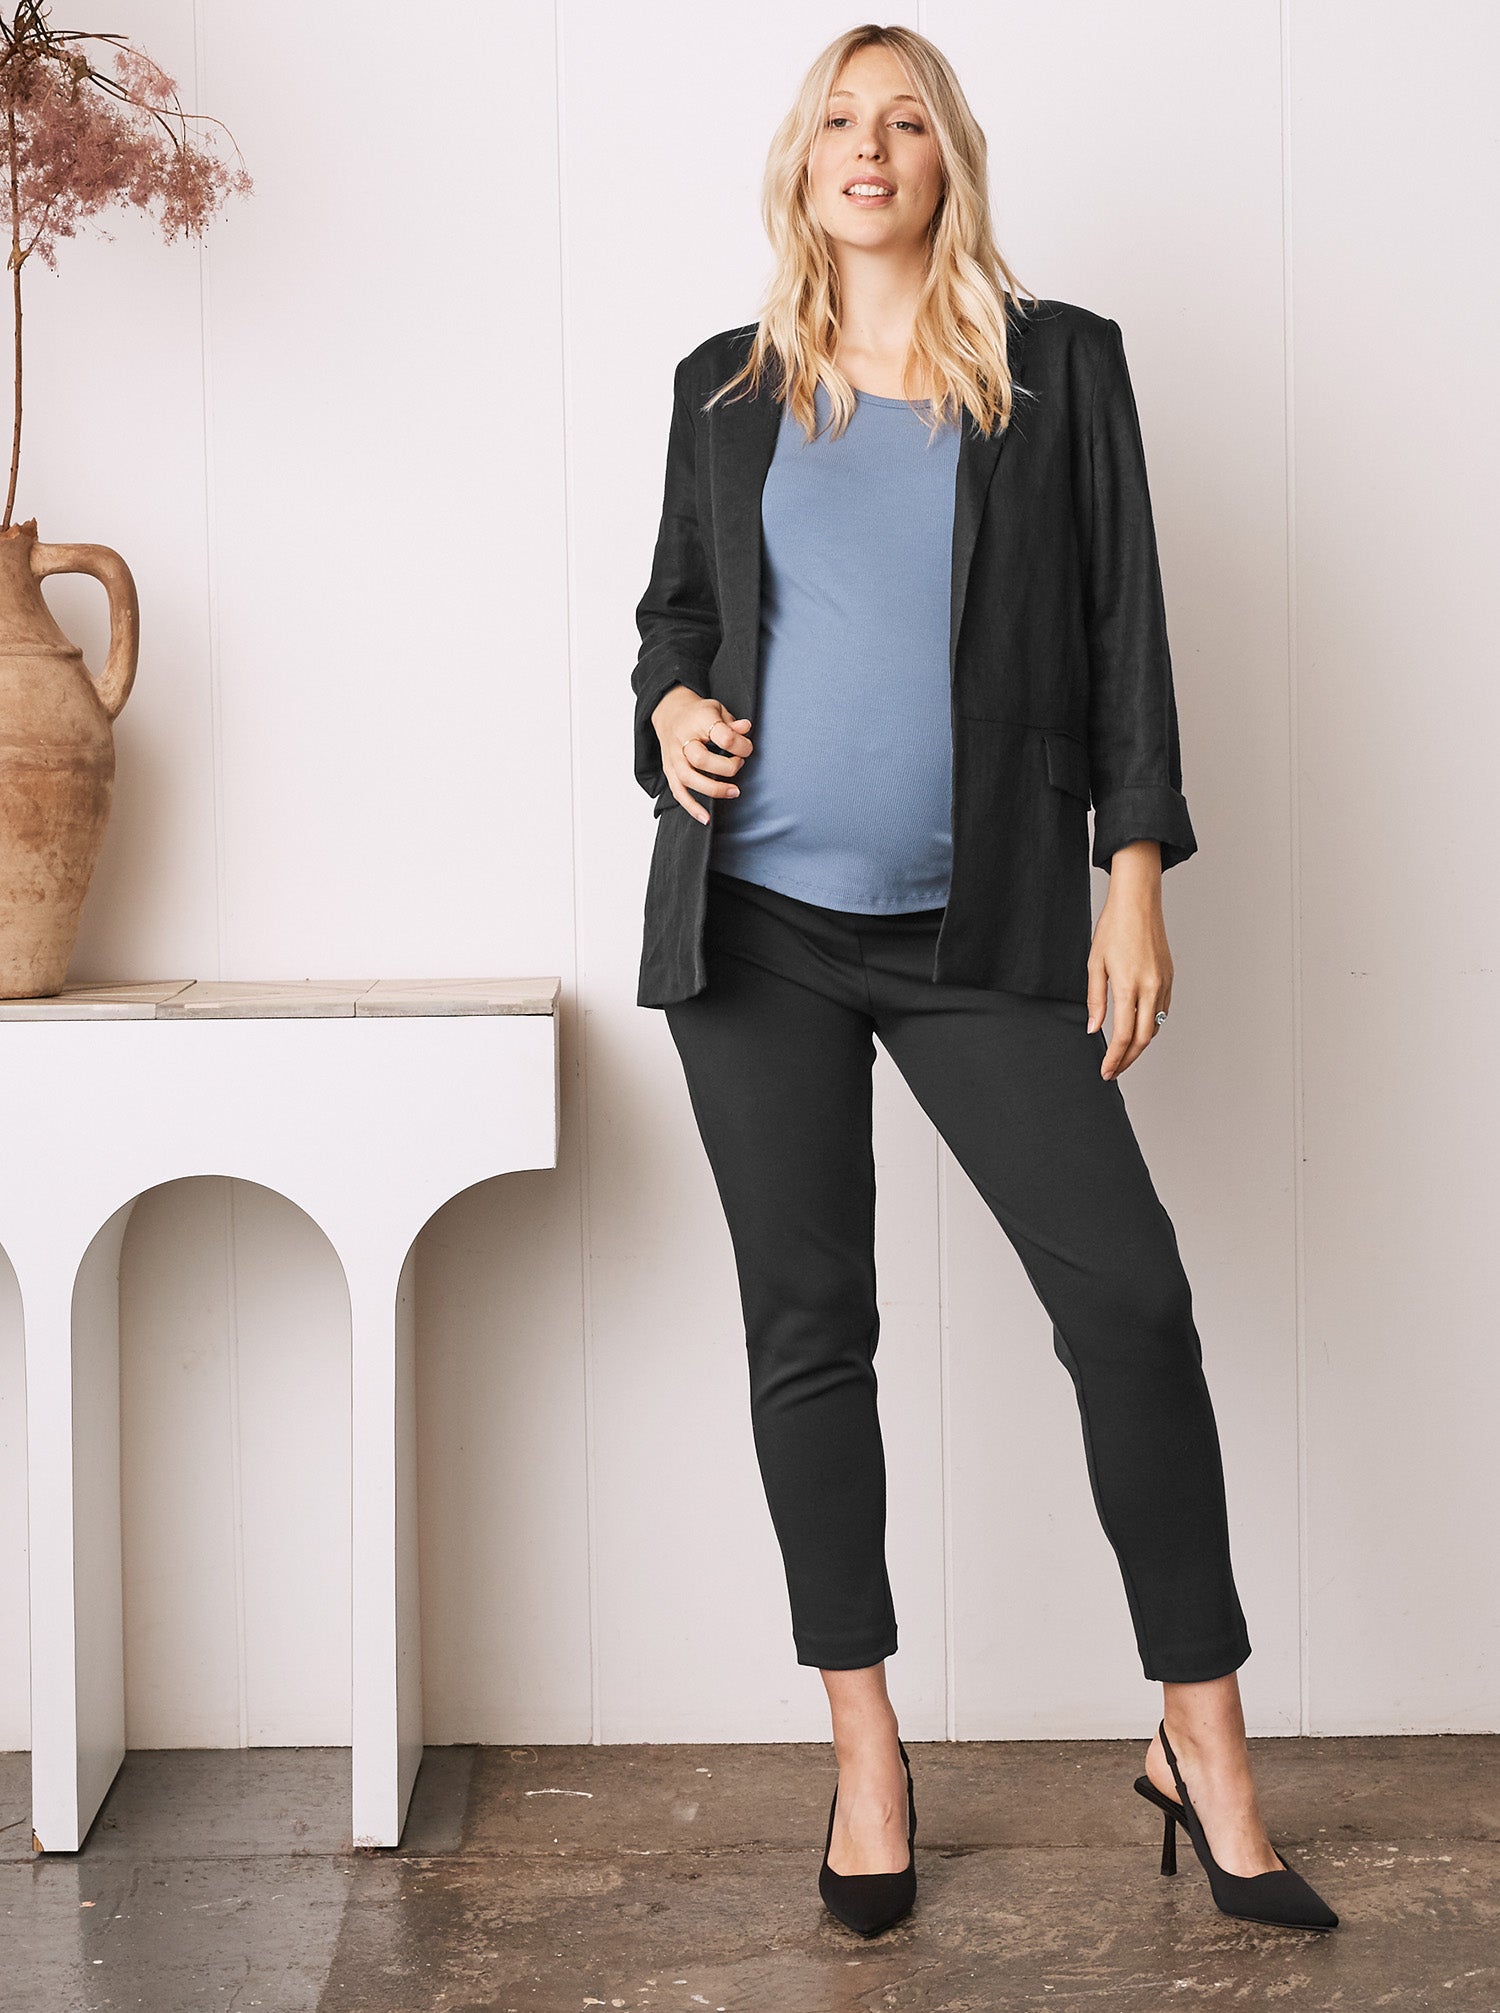 Maternity Clothes - Comfortable Style During Pregnancy | Tupelo Honey